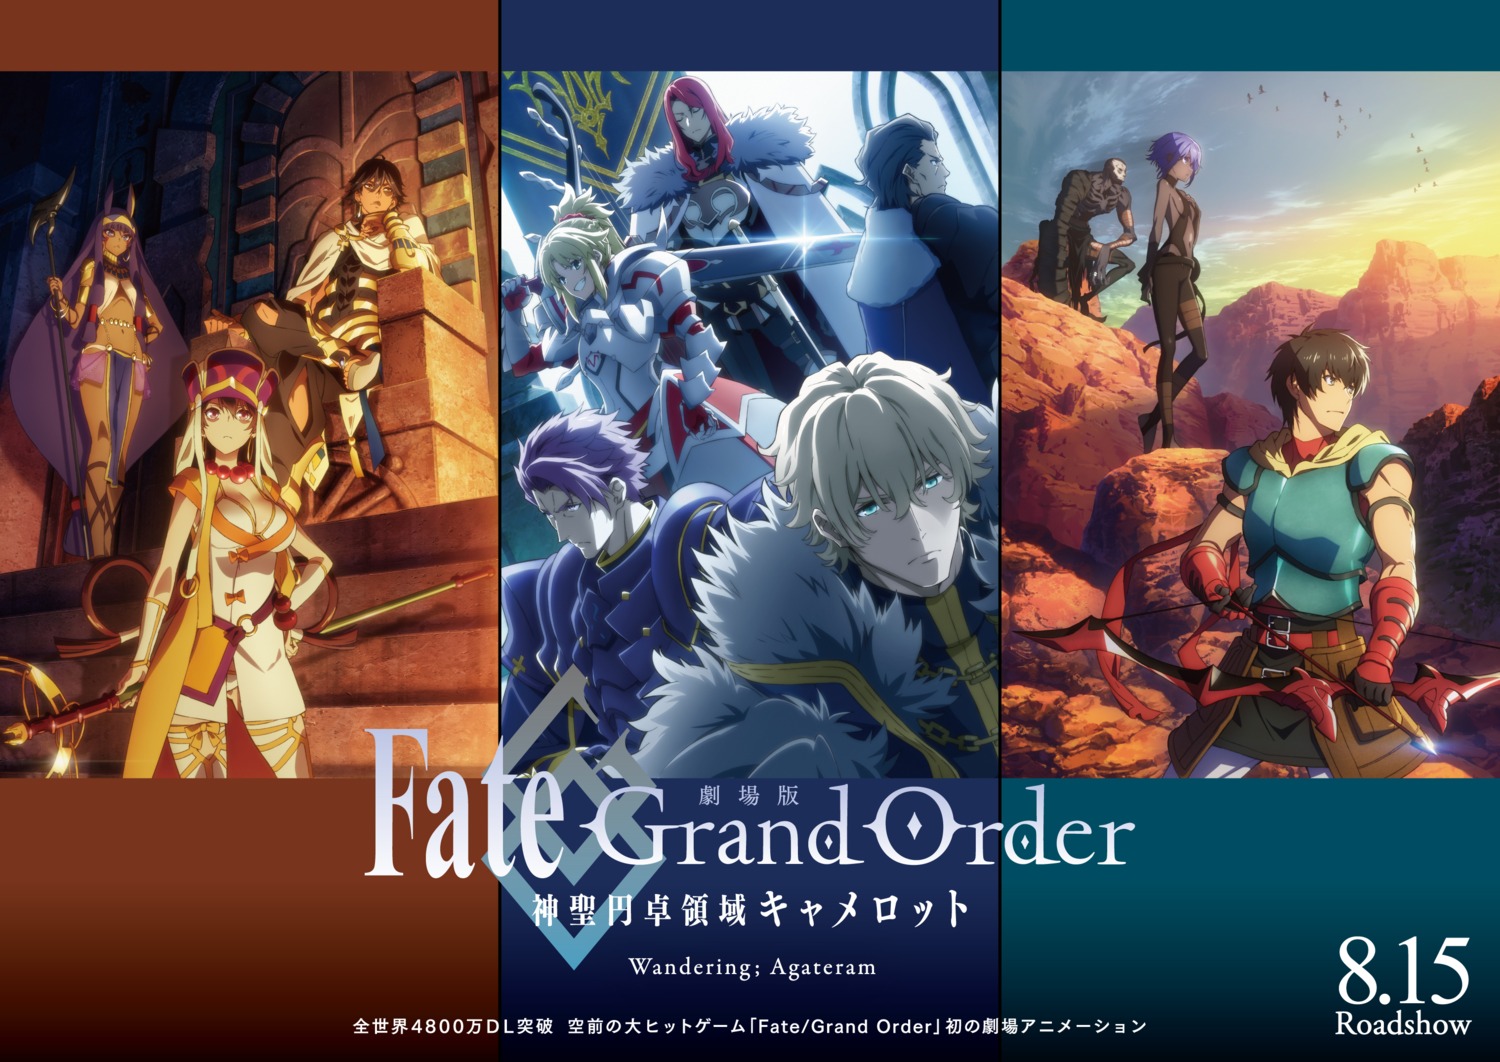 agravain_(fate/grand_order) animal_ears arash_(fate/grand_order) armor assassin_(fsn) bandages bunny_ears cleavage fate/grand_order fate/grand_order_shinsei_entaku_ryouiki_camelot gawain_(fsn) hassan_of_serenity_(fate) lancelot_(fate/grand_order) mordred_(fate) nitocris_(fate/grand_order) no_bra ozymandias_(fate/grand_order) pantyhose sword tagme thighhighs tristan_(fate/grand_order) weapon